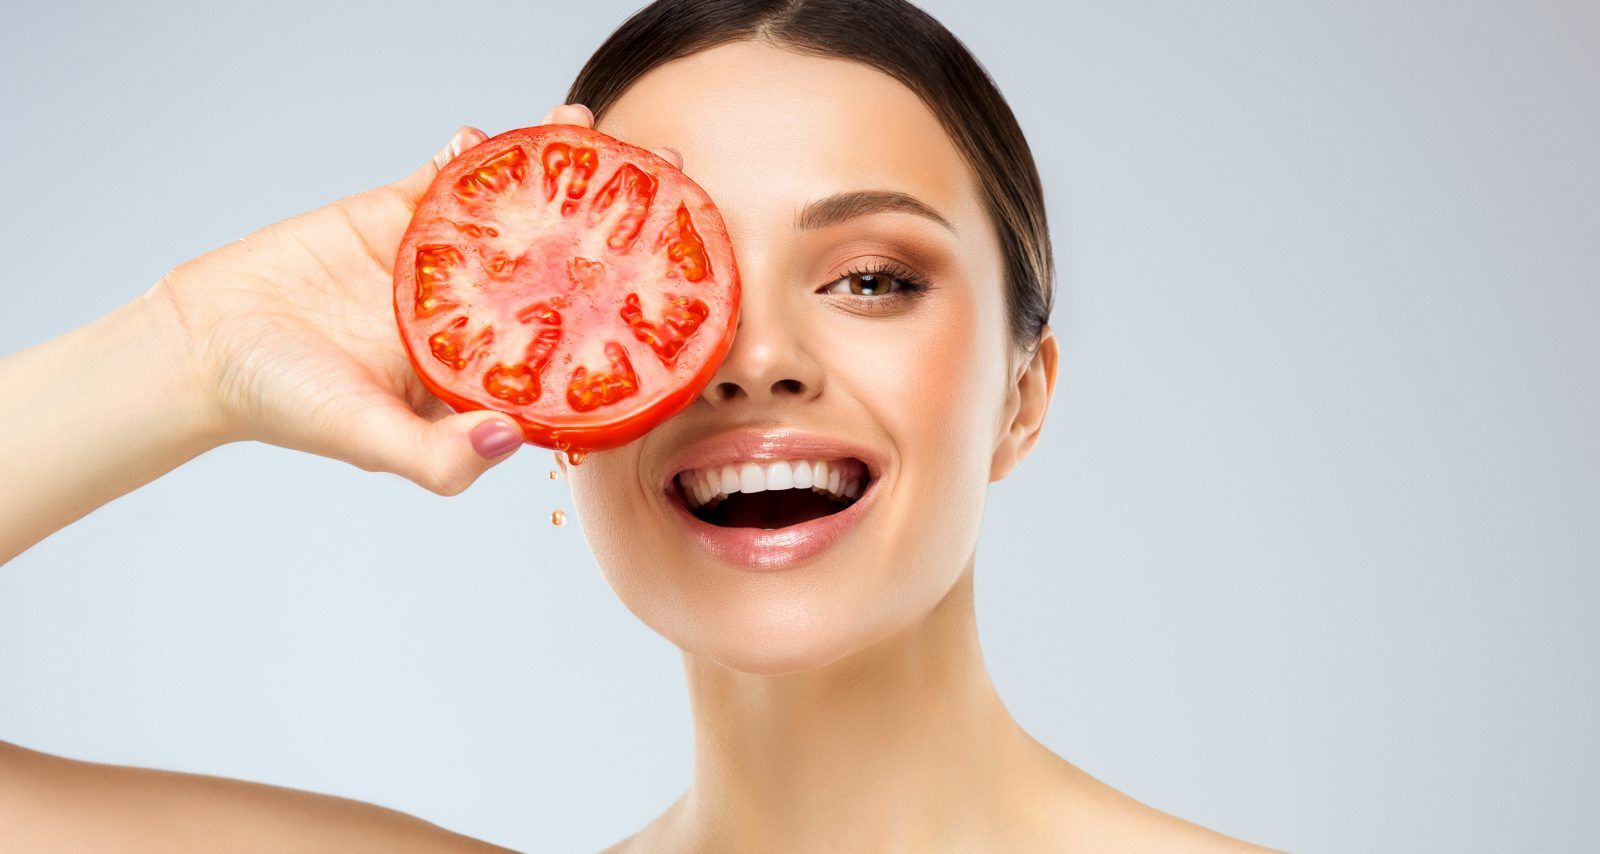 Tomato for skin: Benefits, DIY face masks and how to use